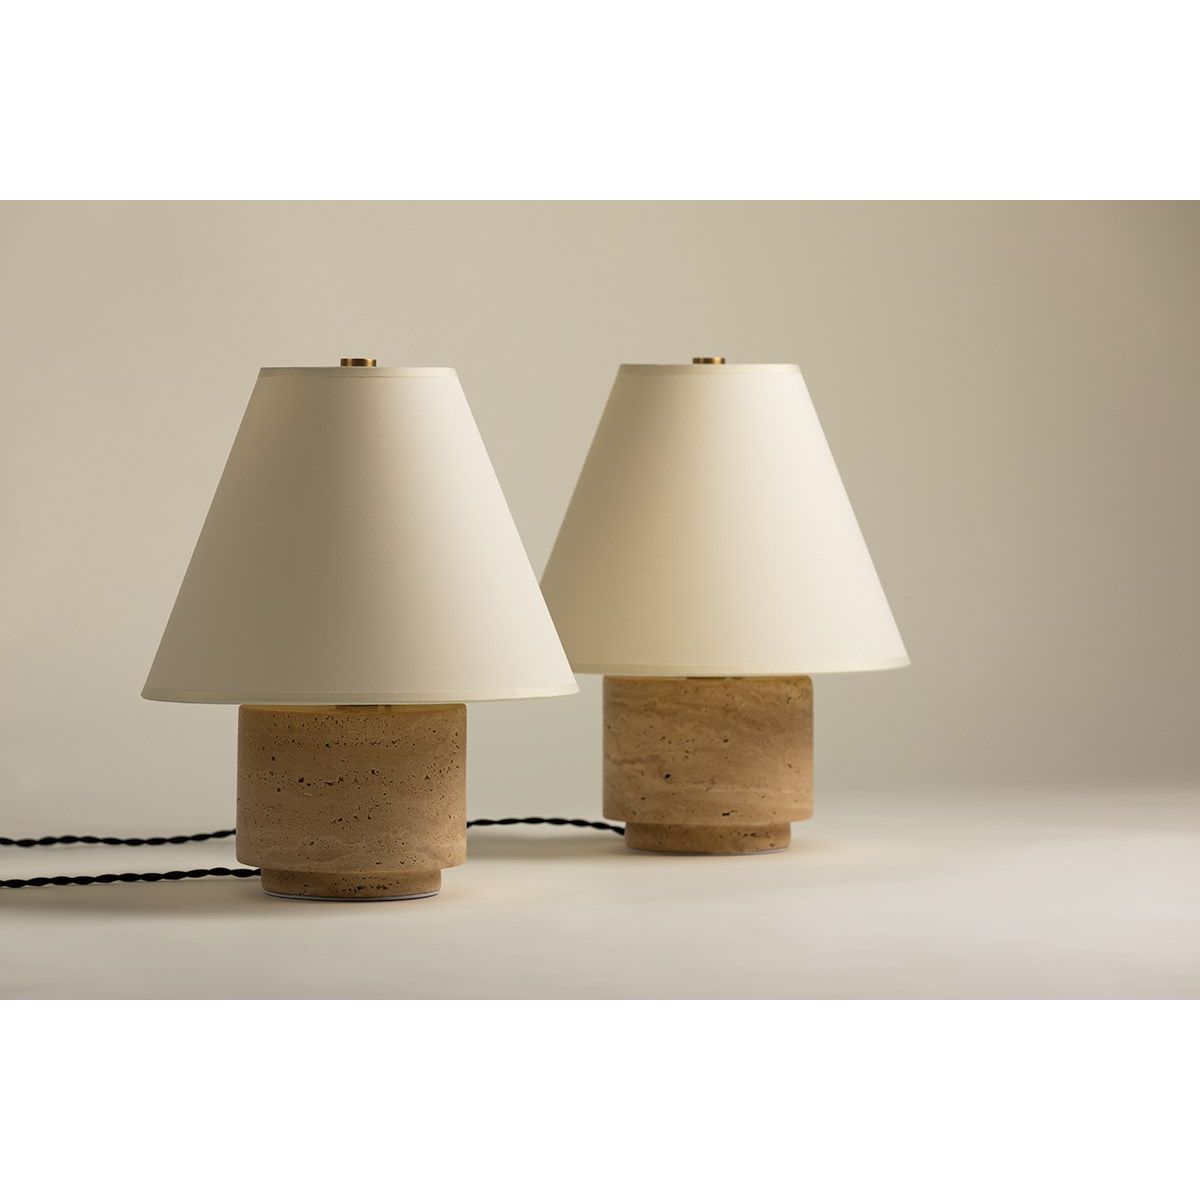 Bronte Table Lamp Natural Travertine Base with Patina Brass Accents - Bees Lighting